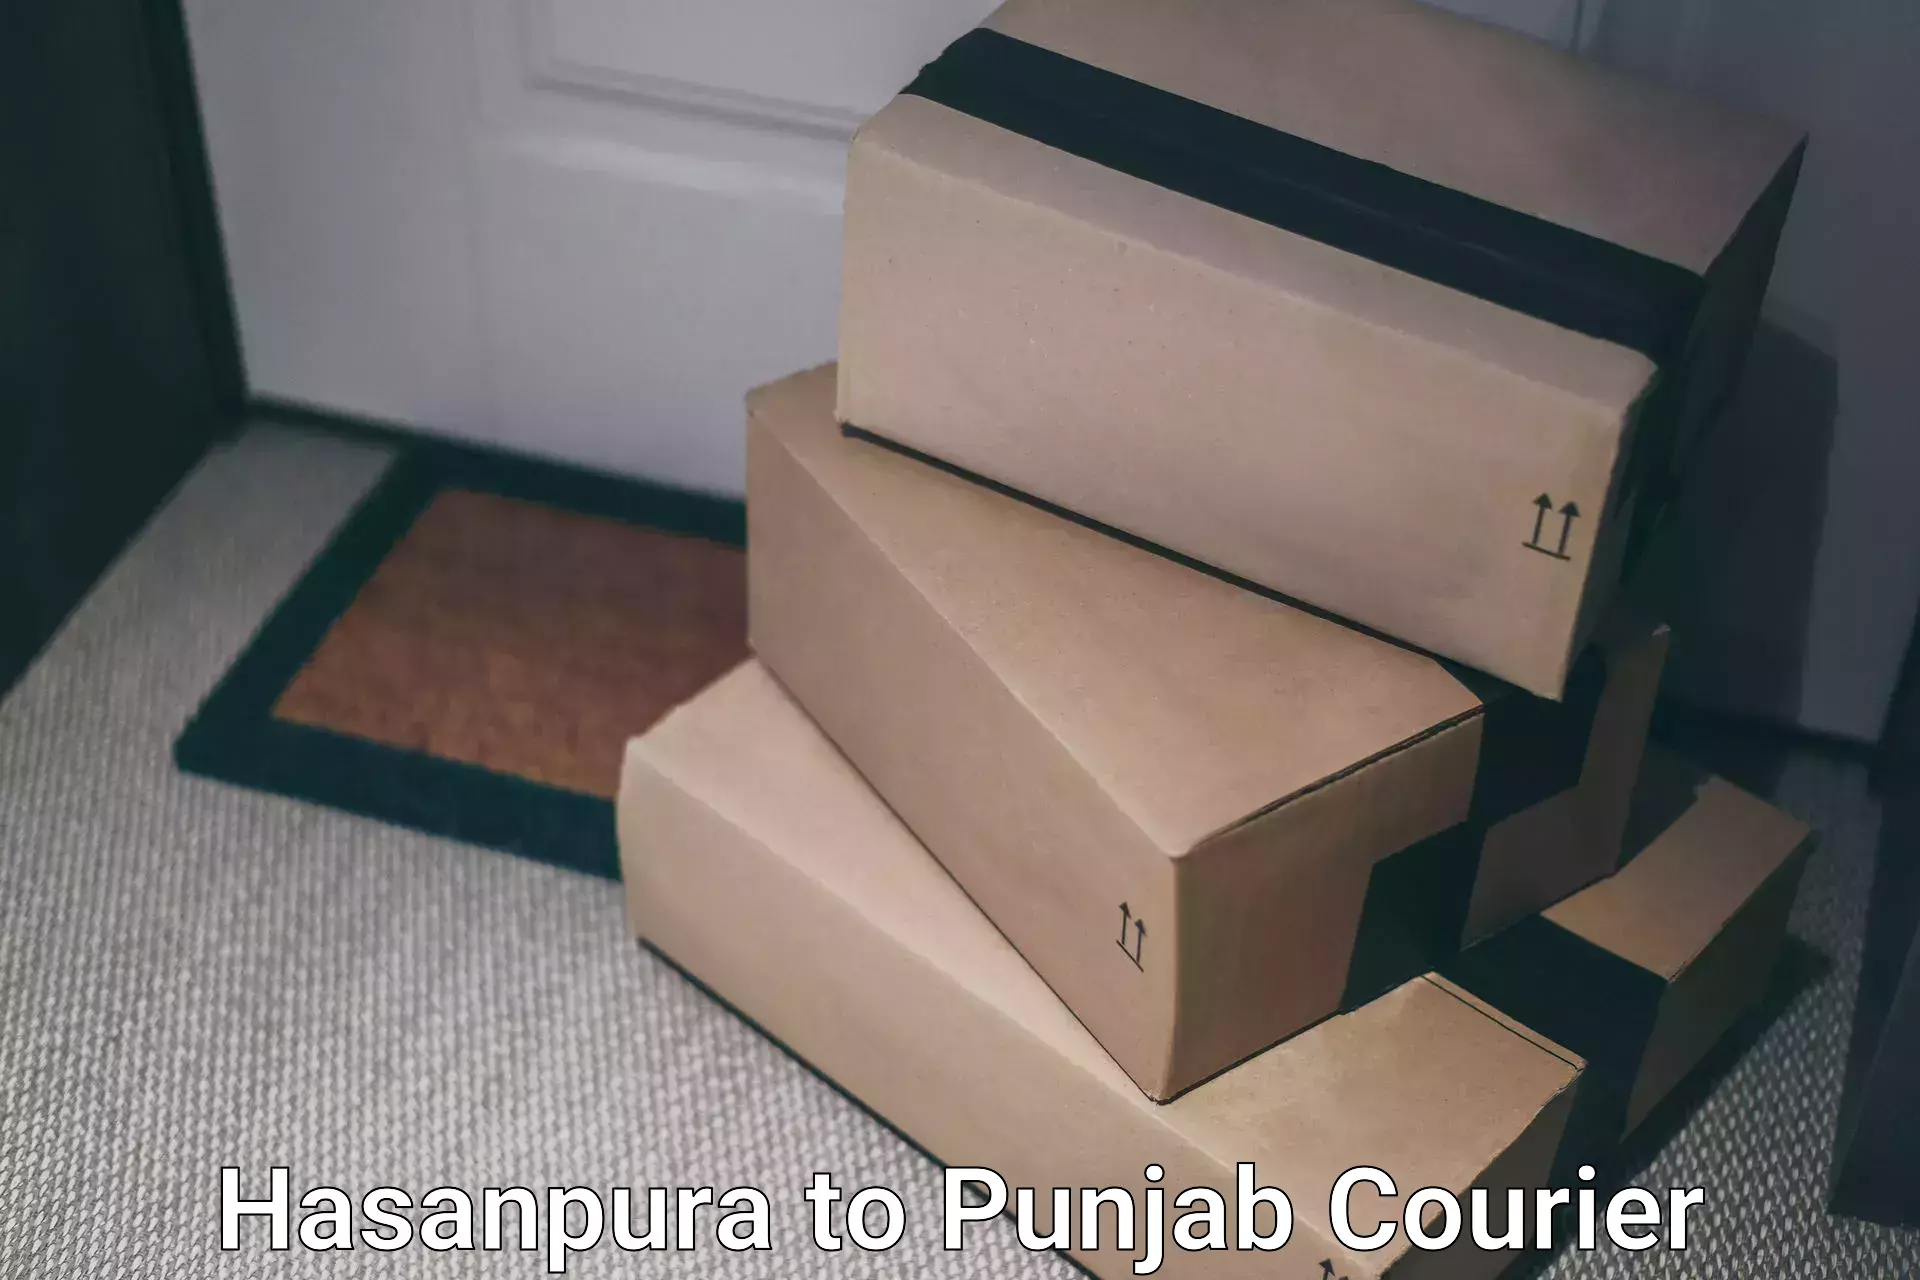 Flexible delivery scheduling Hasanpura to Punjab